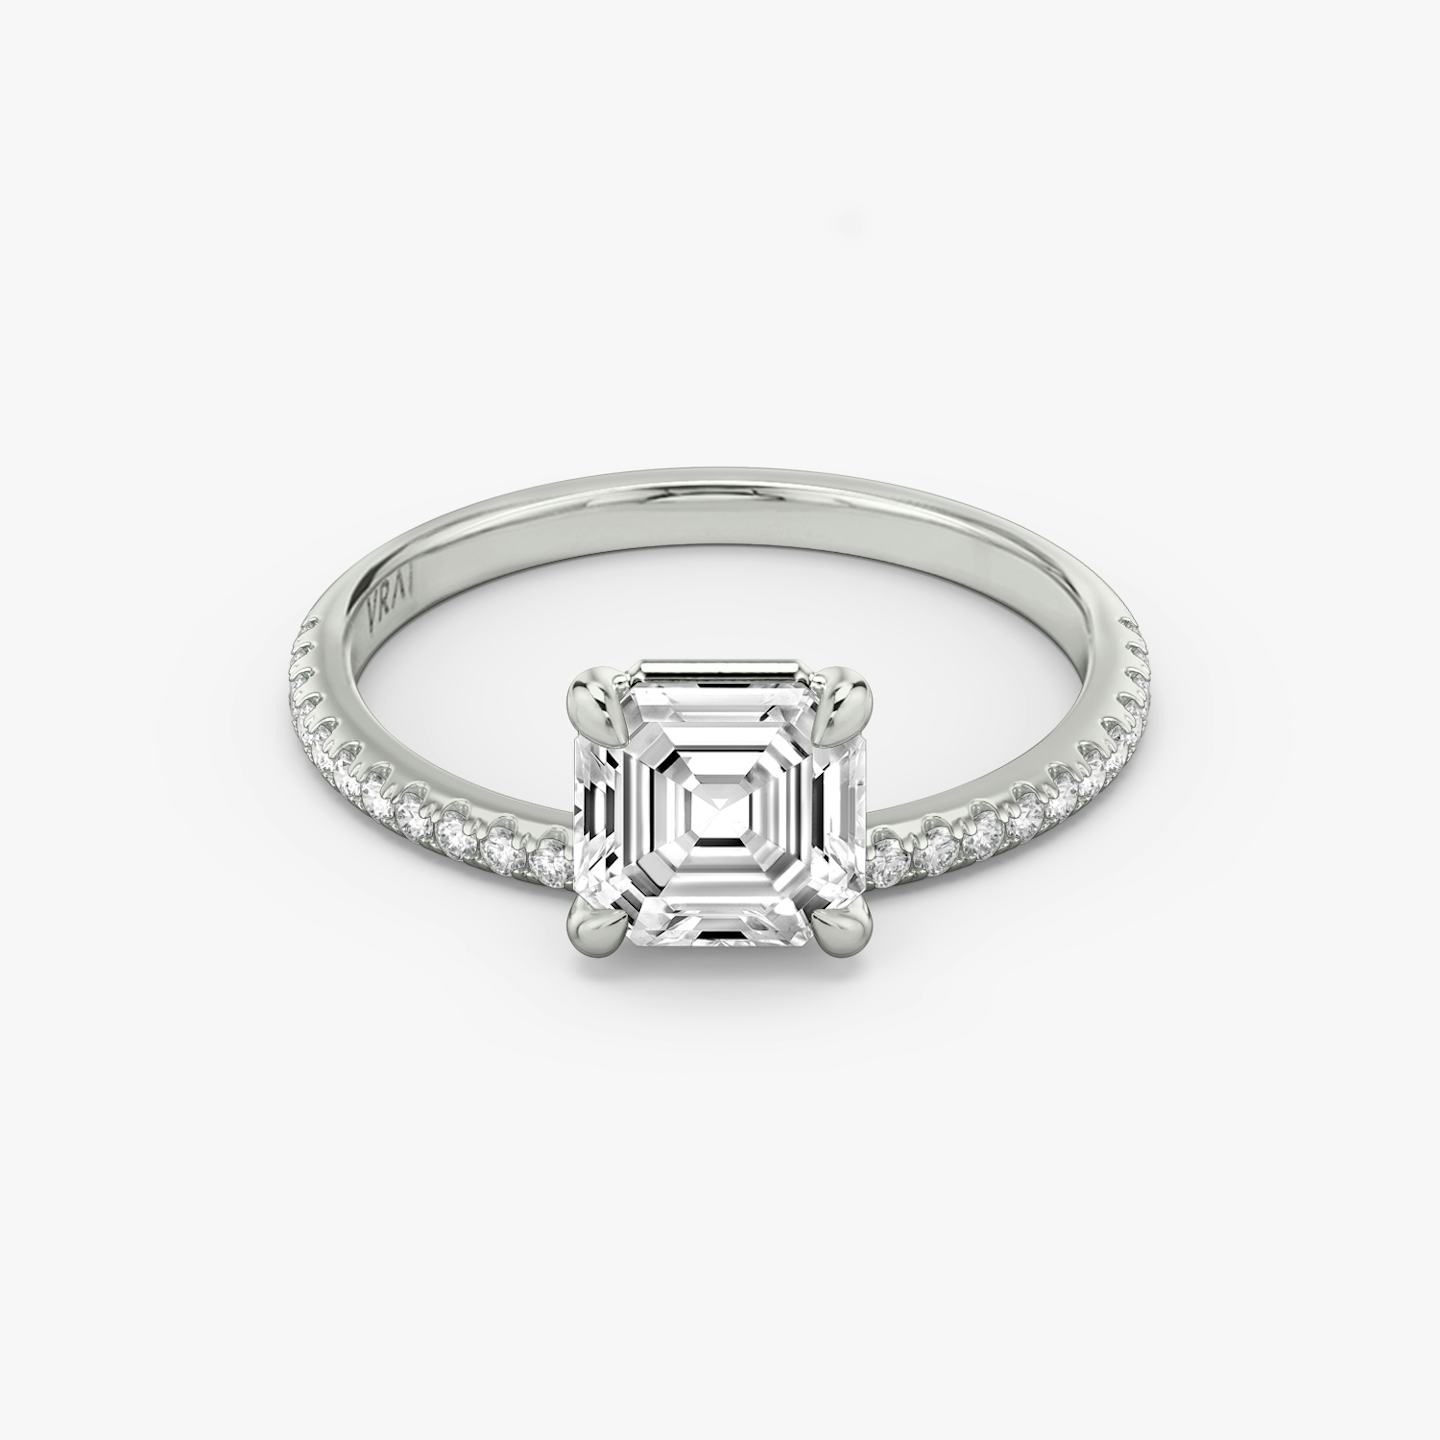 The Hover Asscher Diamond Ring